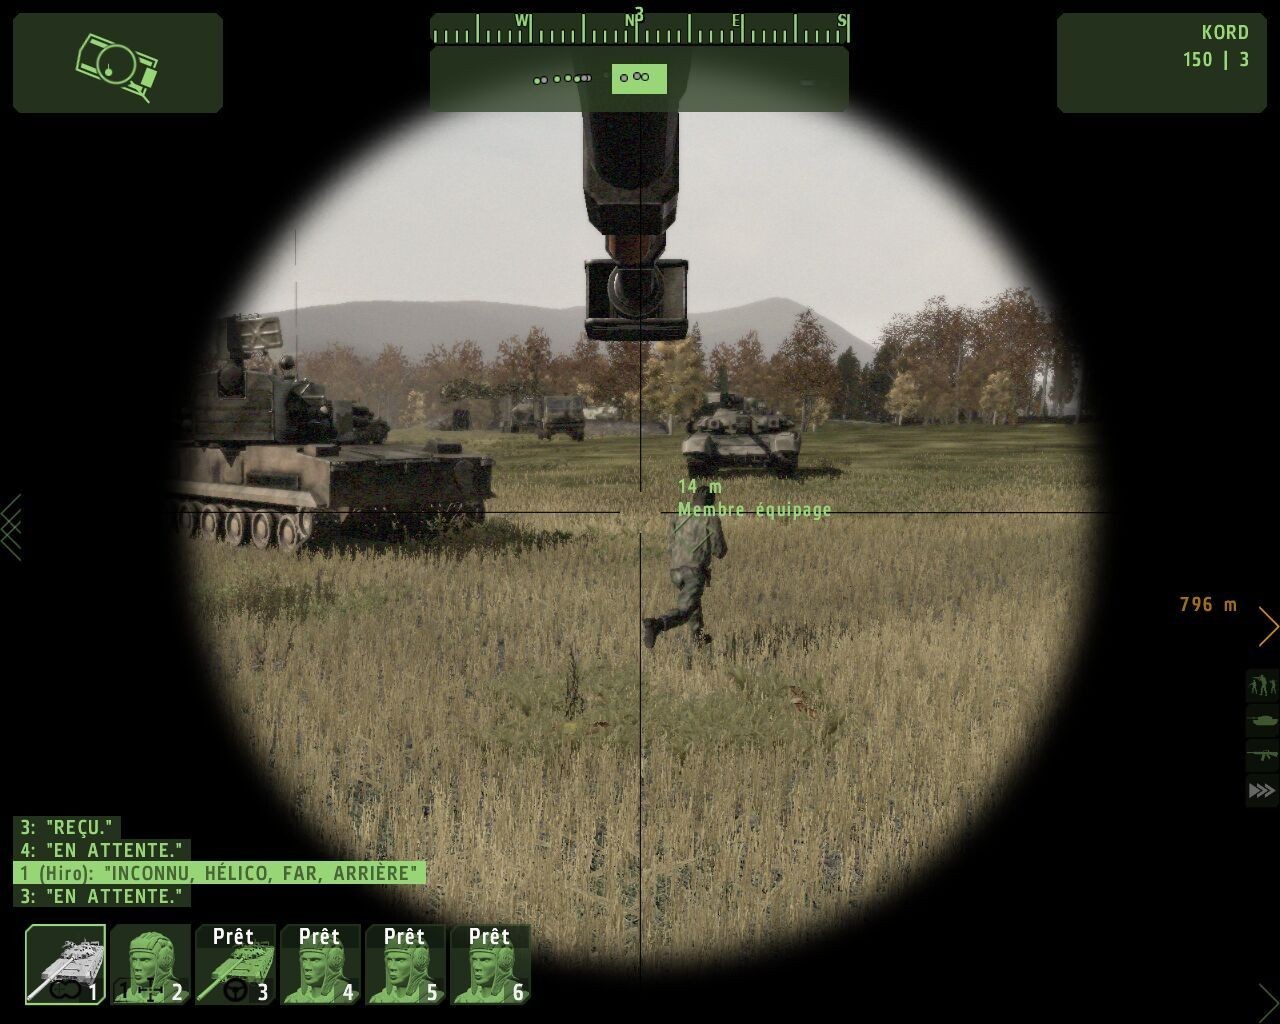 arma 2 combined operations free full game